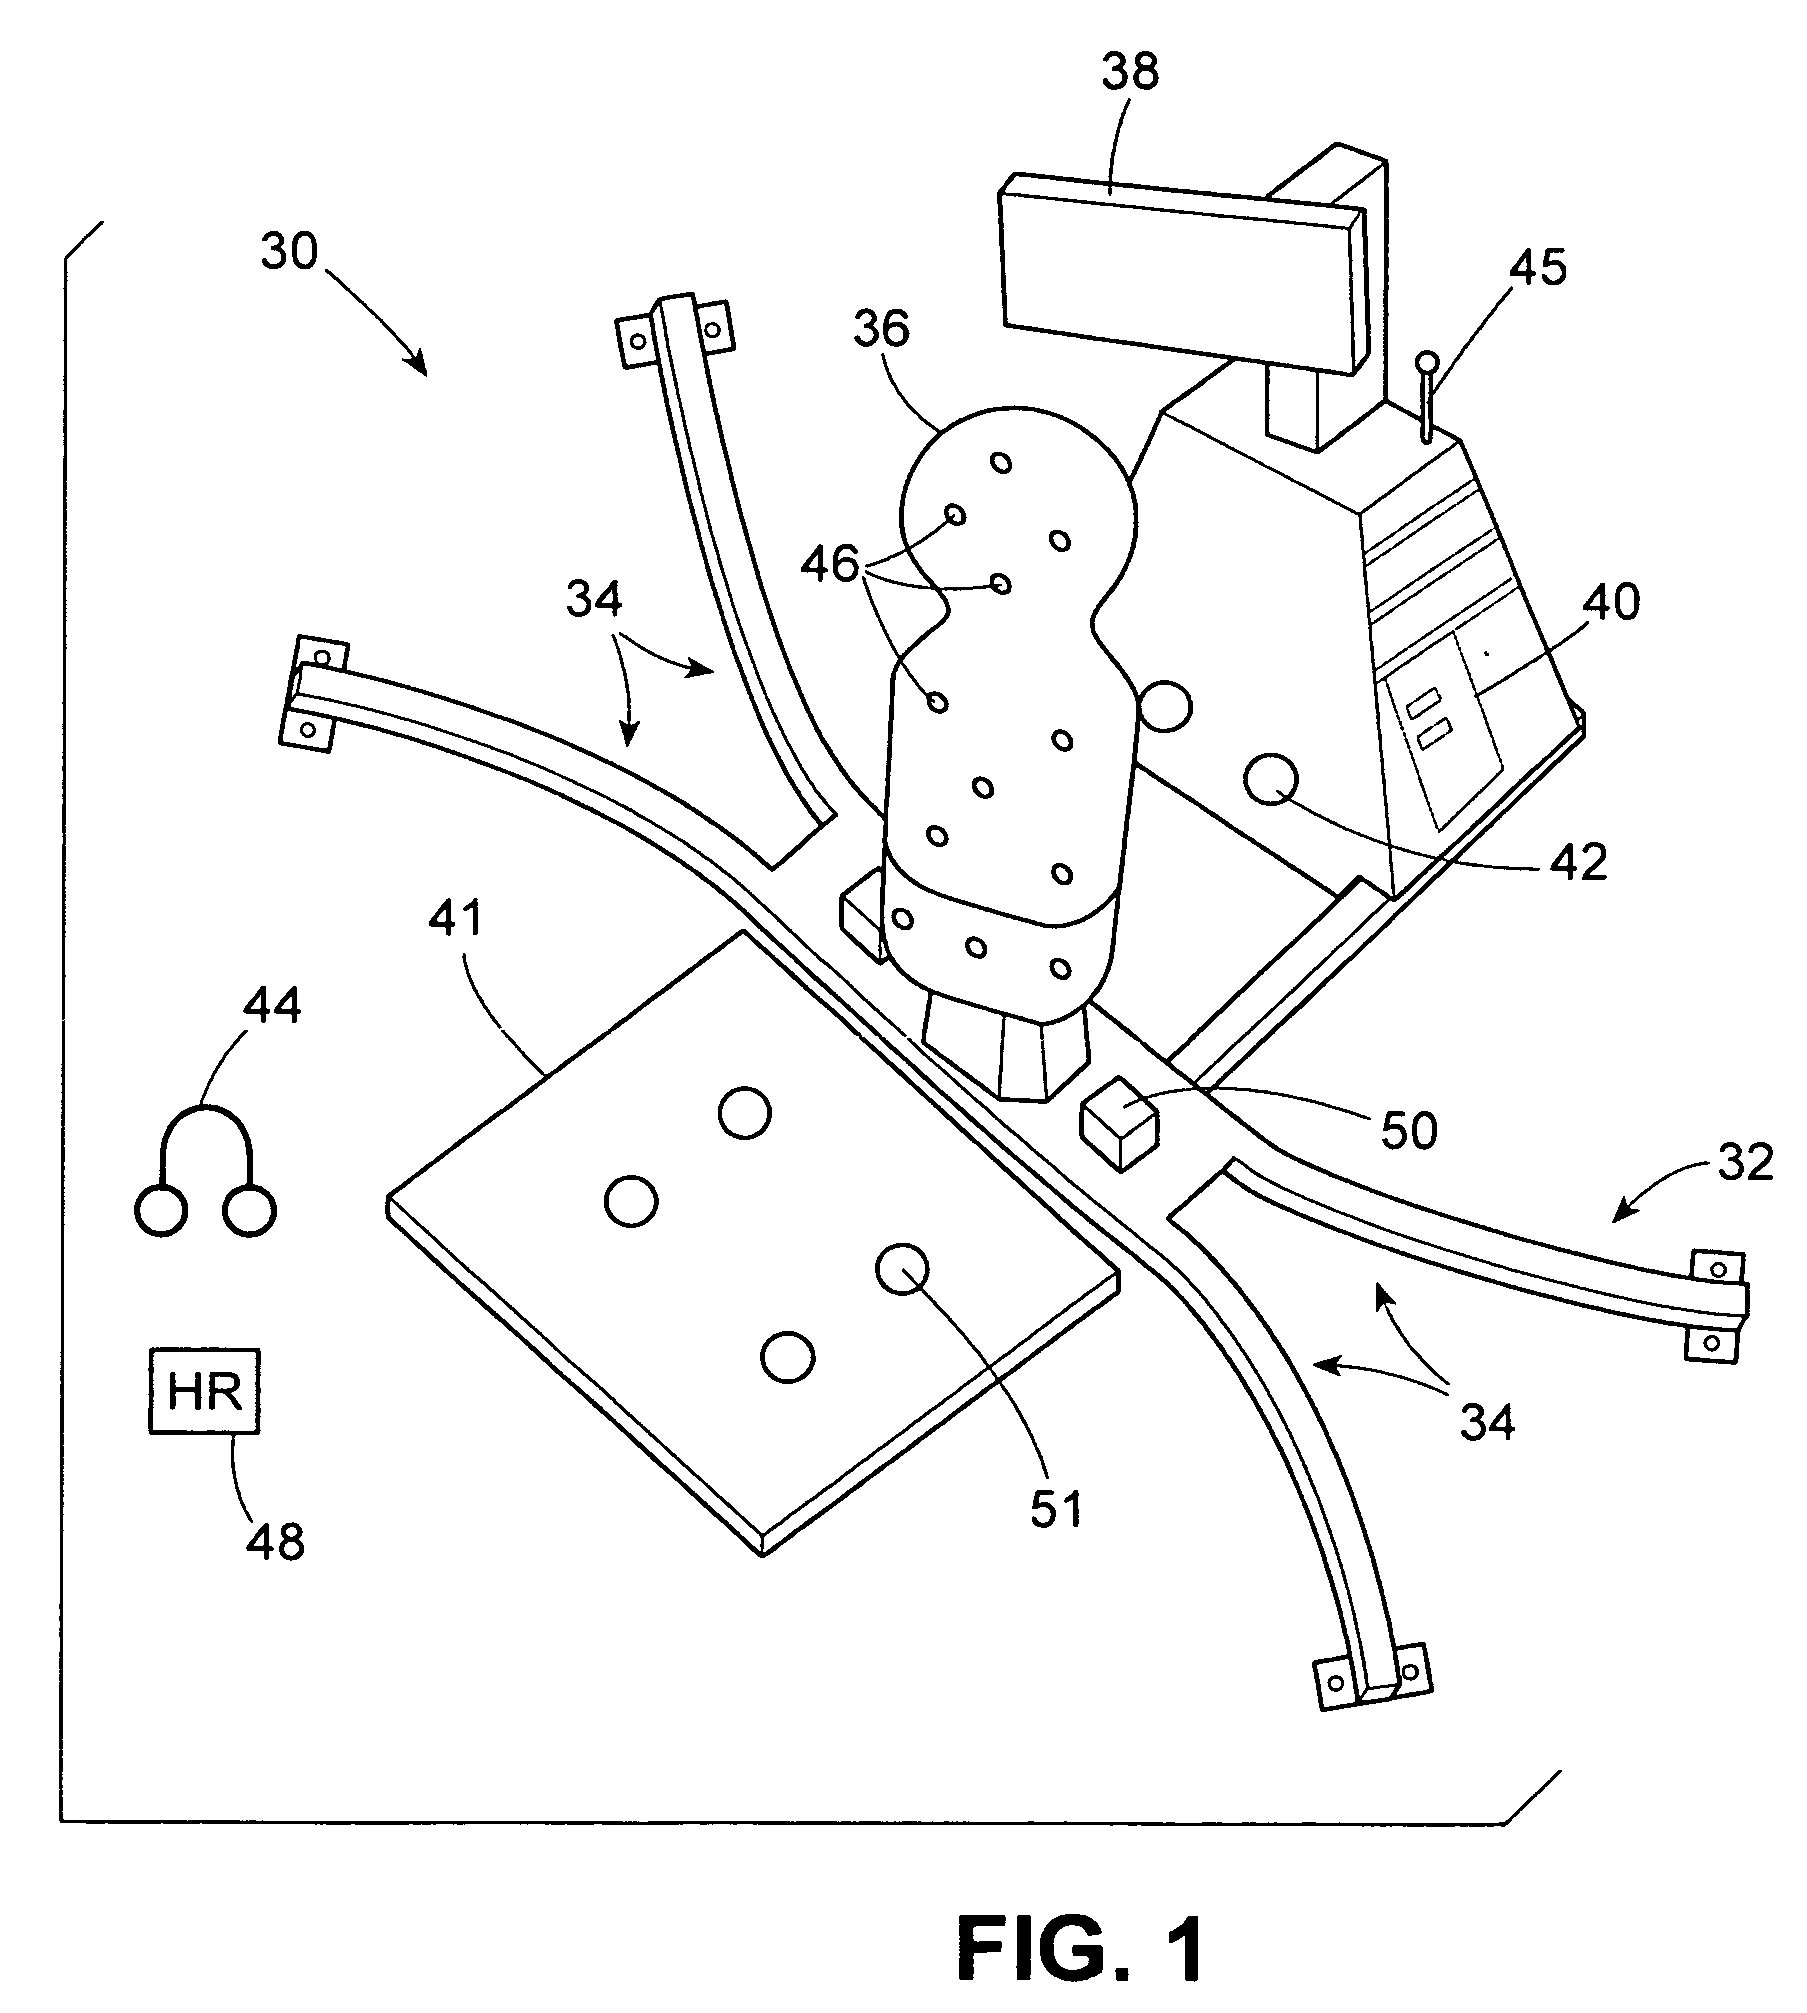 Method for providing a feedback-controlled exercise routine